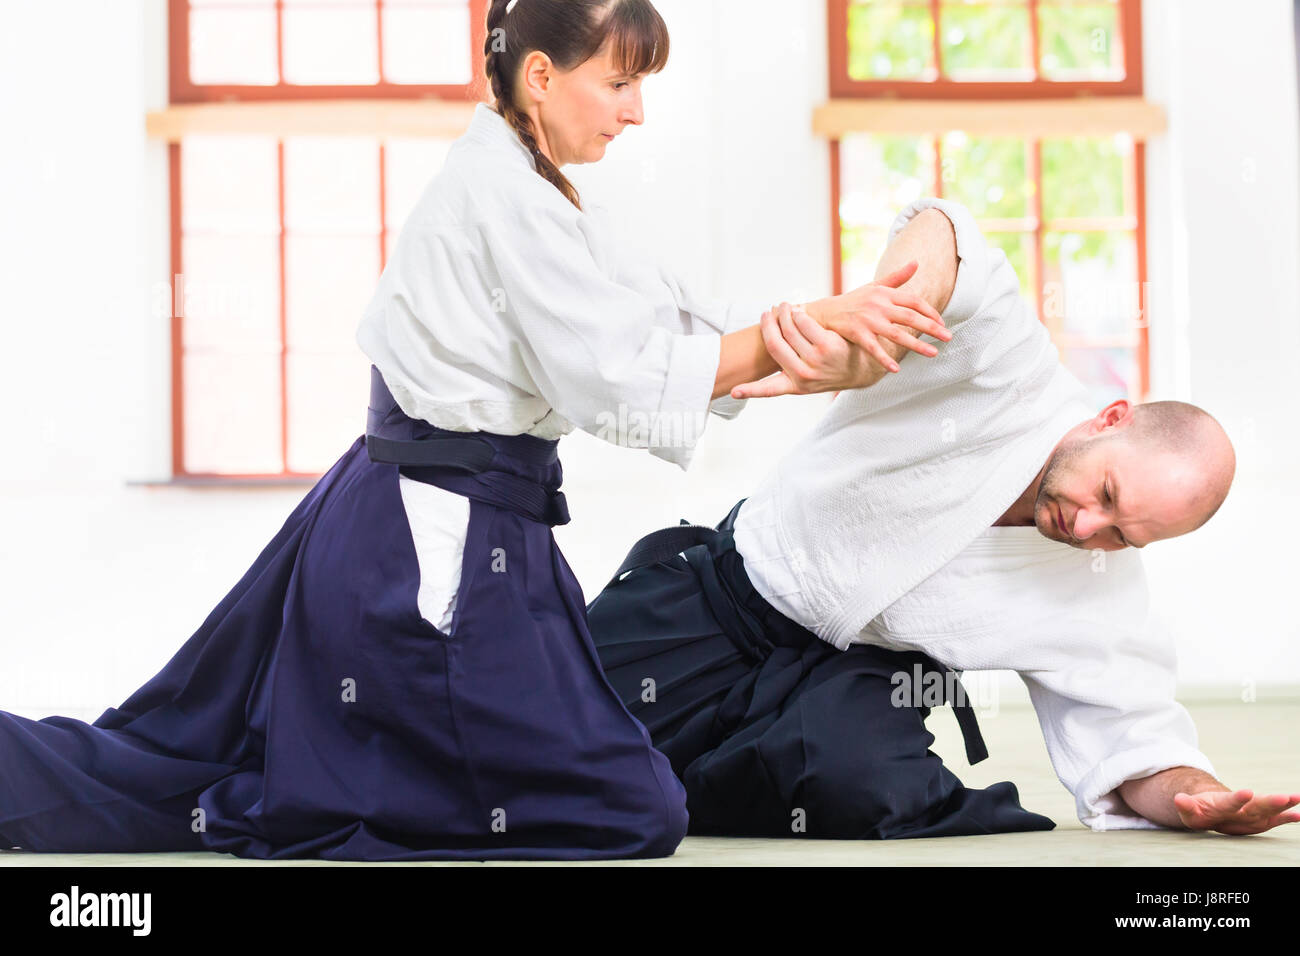 Man and woman fighting at Aikido martial arts school Stock Photo